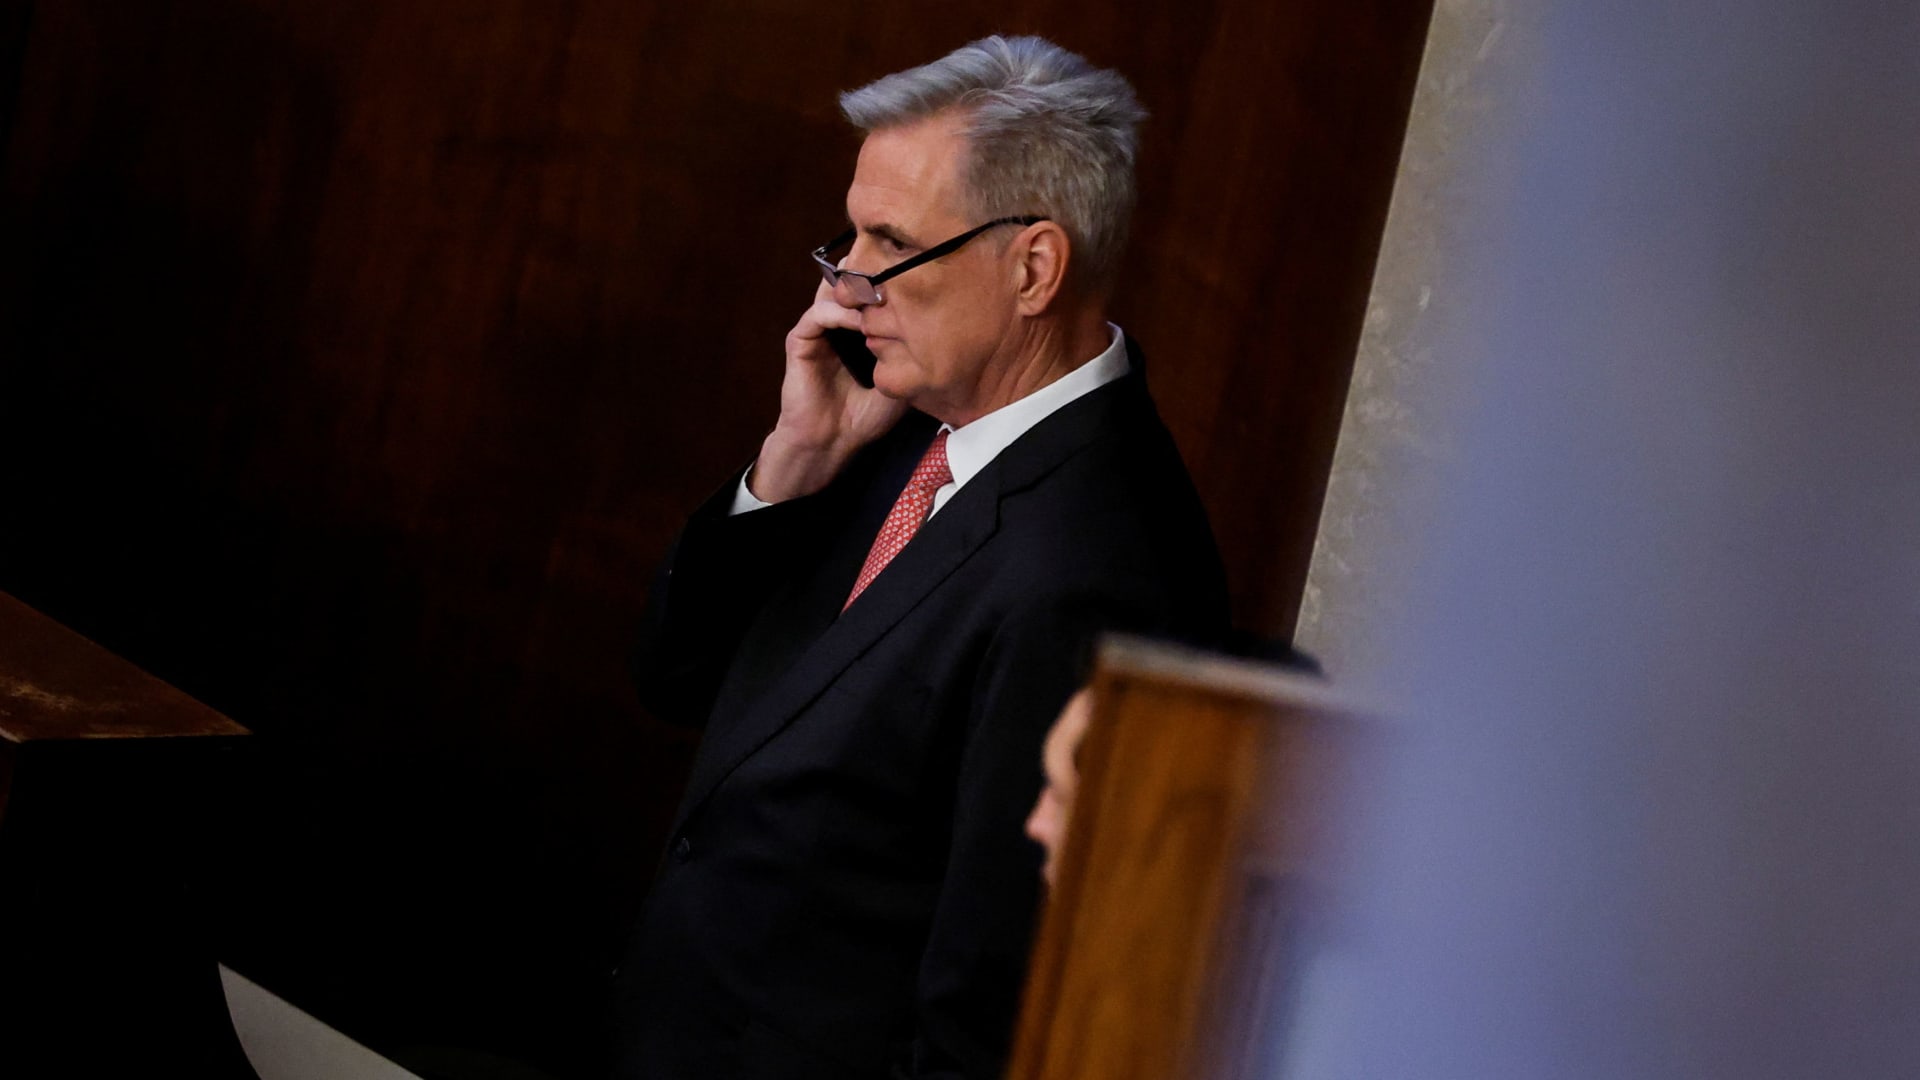 House Republican Leader Kevin McCarthy (R-CA) talks on a mobile phone inside the House Chamber during voting for a new Speaker on the third day of the 118th Congress at the U.S. Capitol in Washington, January 5, 2023.